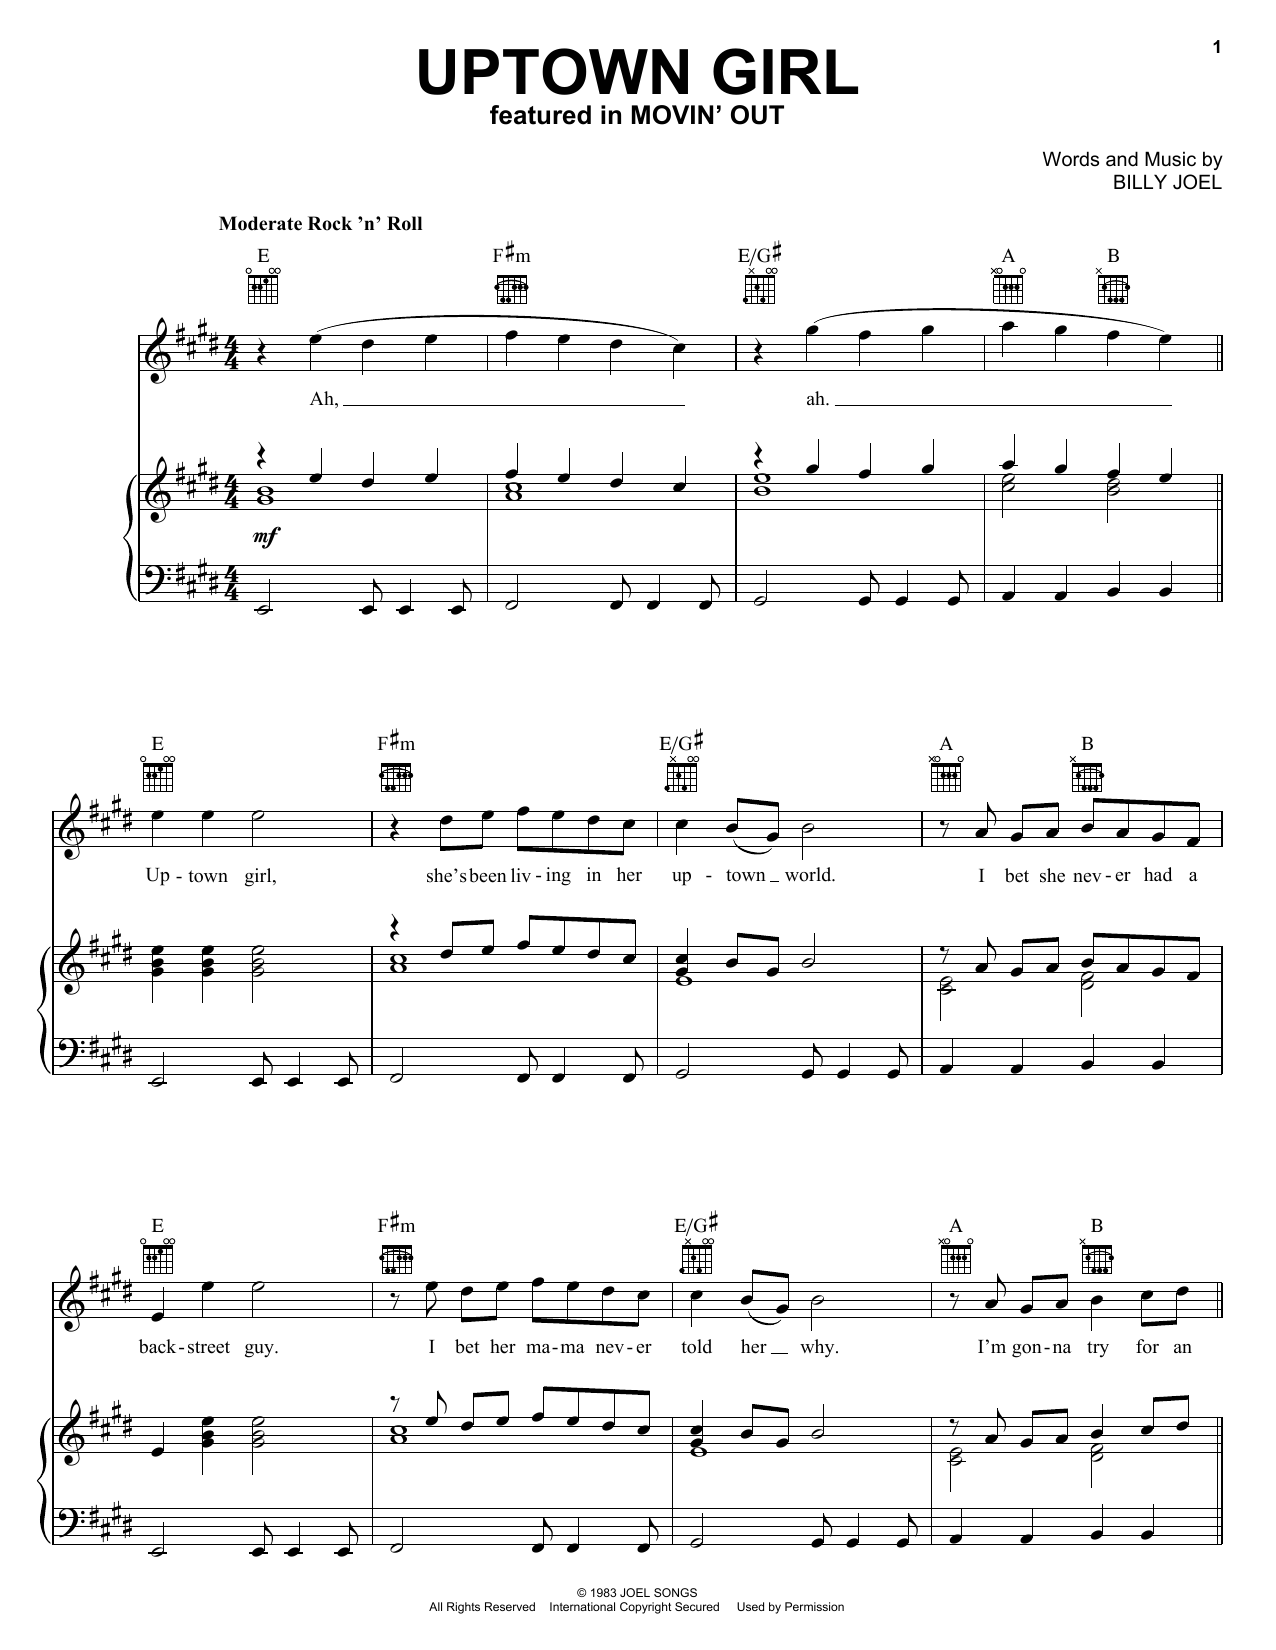 Billy Joel Uptown Girl sheet music notes and chords. Download Printable PDF.